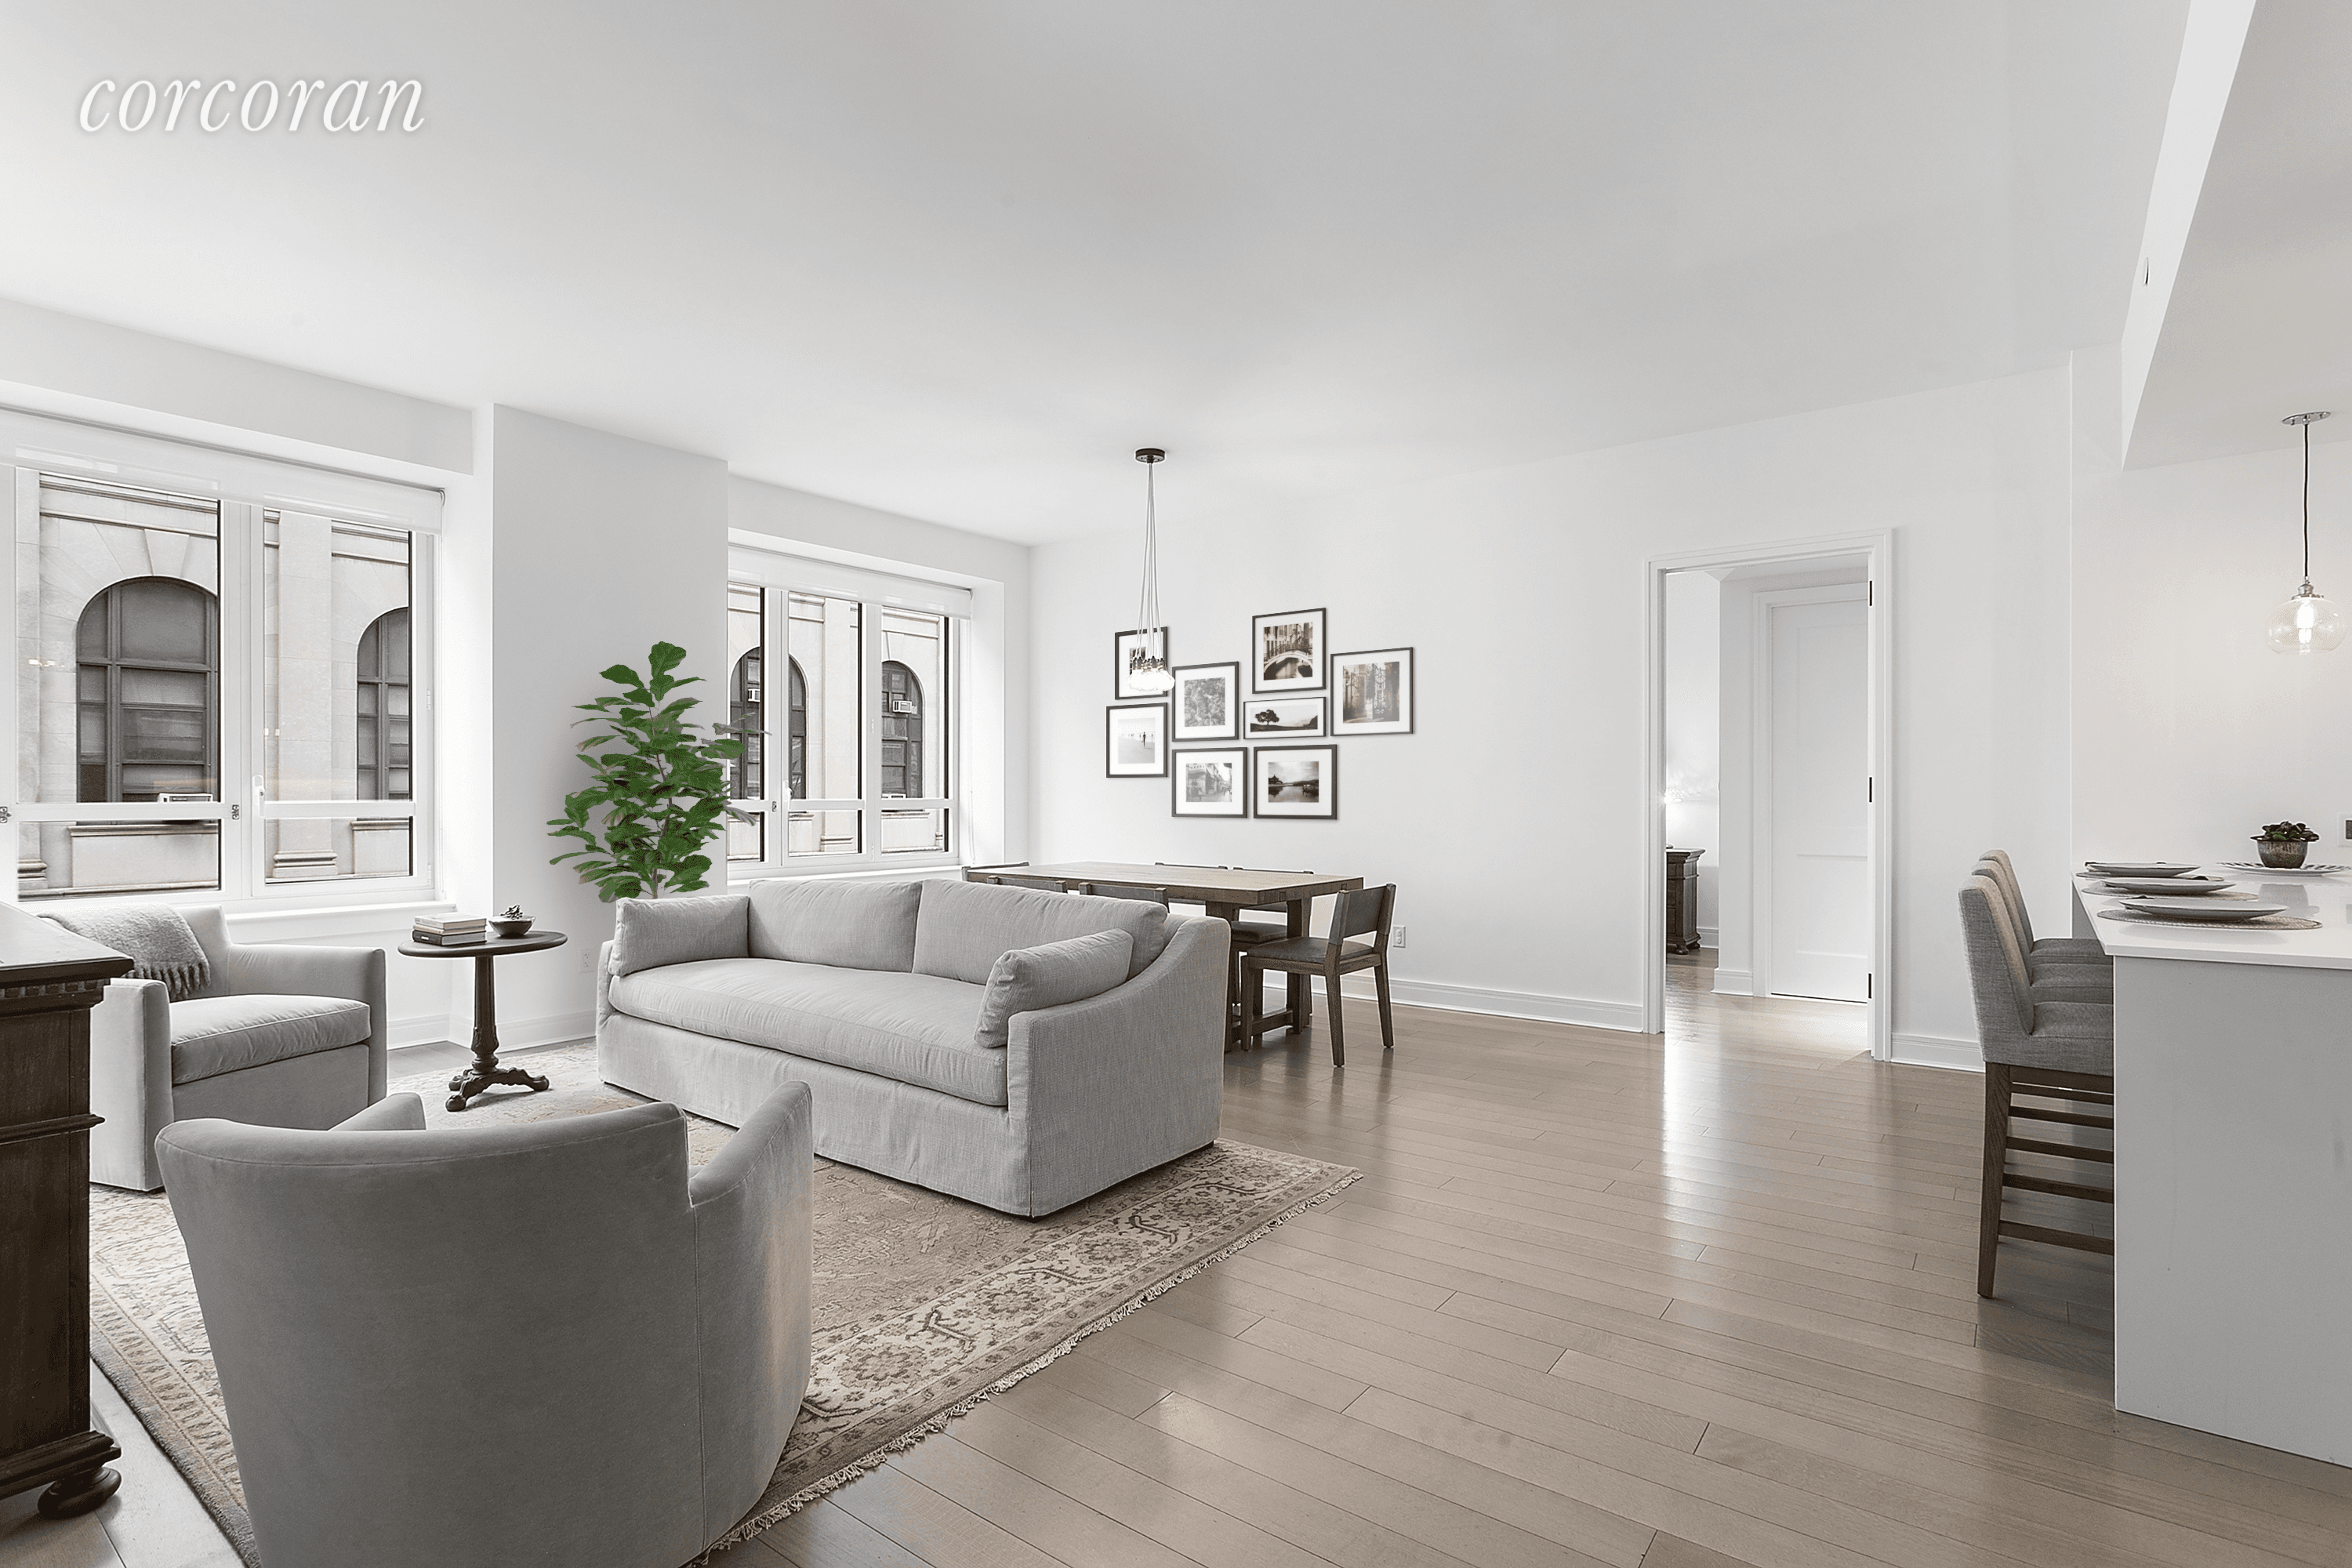 Welcome to Apartment 806 at 265 State Street, the largest two bedroom, two bath layout at The Boerum, an incredibly popular full service condominium at the crossroads of Boerum Hill, ...